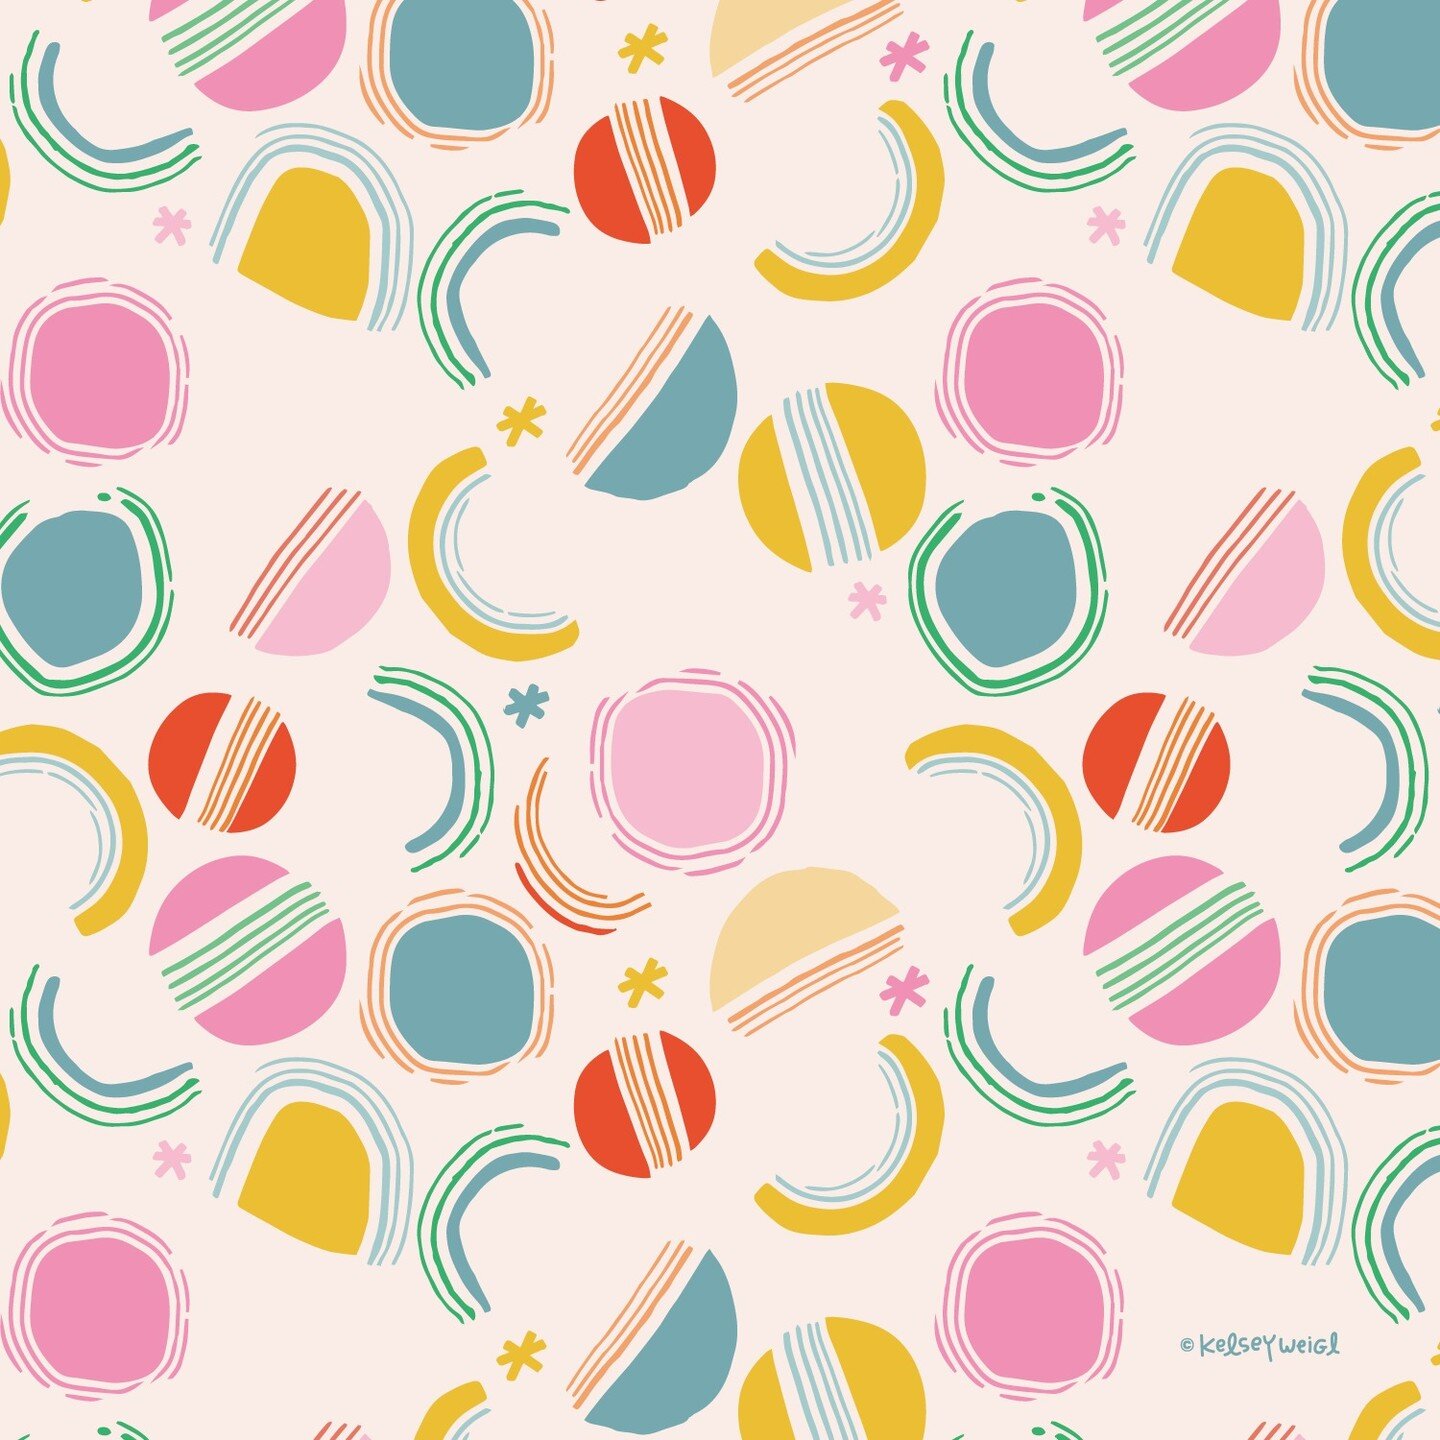 When the re-colour artwork tool hits just right. 

#doodles #surfacepatterndesign #patternplay #patterndesign #repeatingpattern #licensingartist #comeandplay #sleepwear #okcute #cutepatterns #momlife #creativeliving